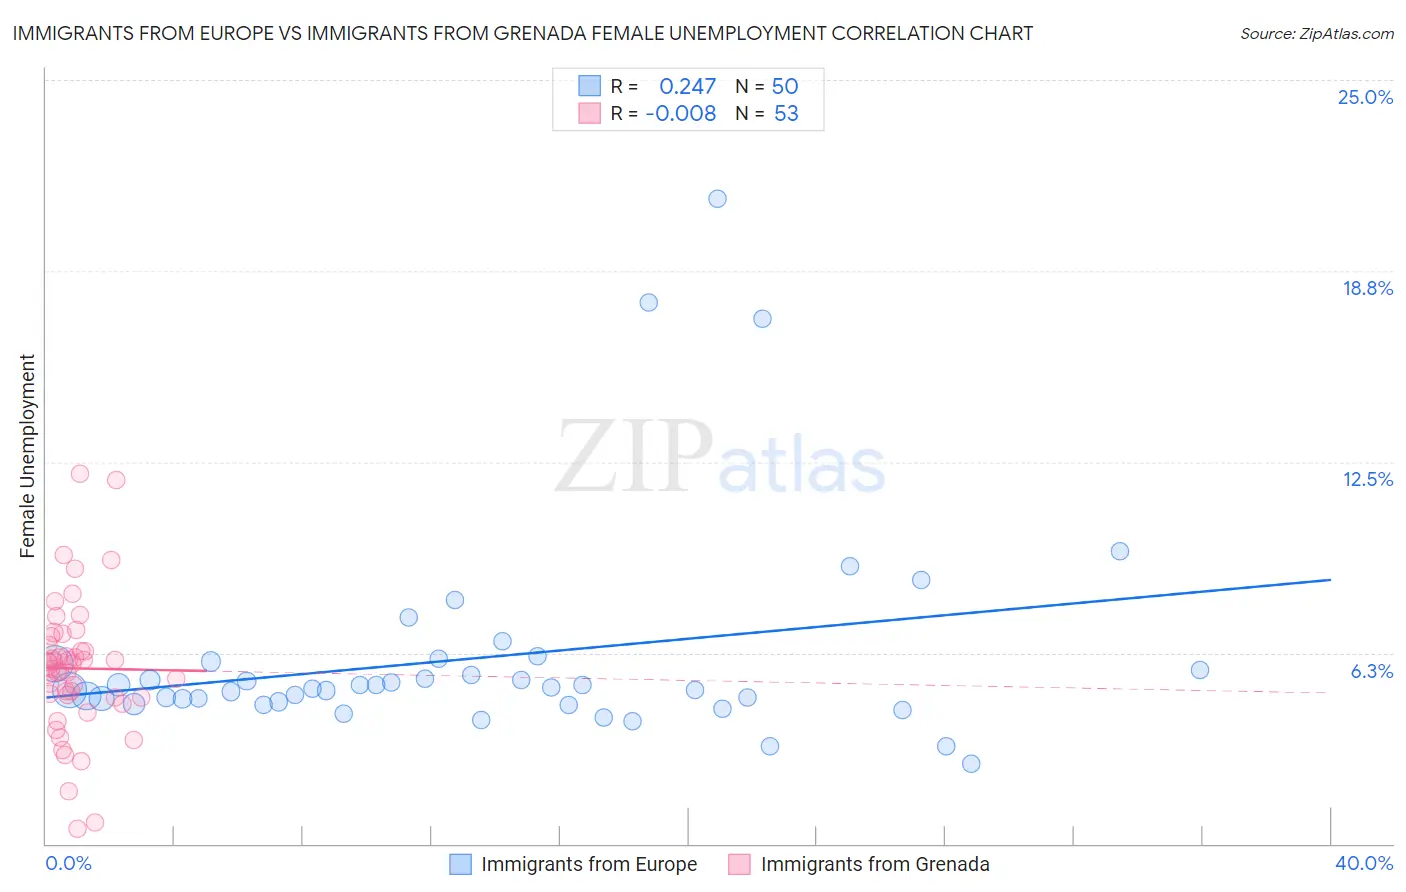 Immigrants from Europe vs Immigrants from Grenada Female Unemployment